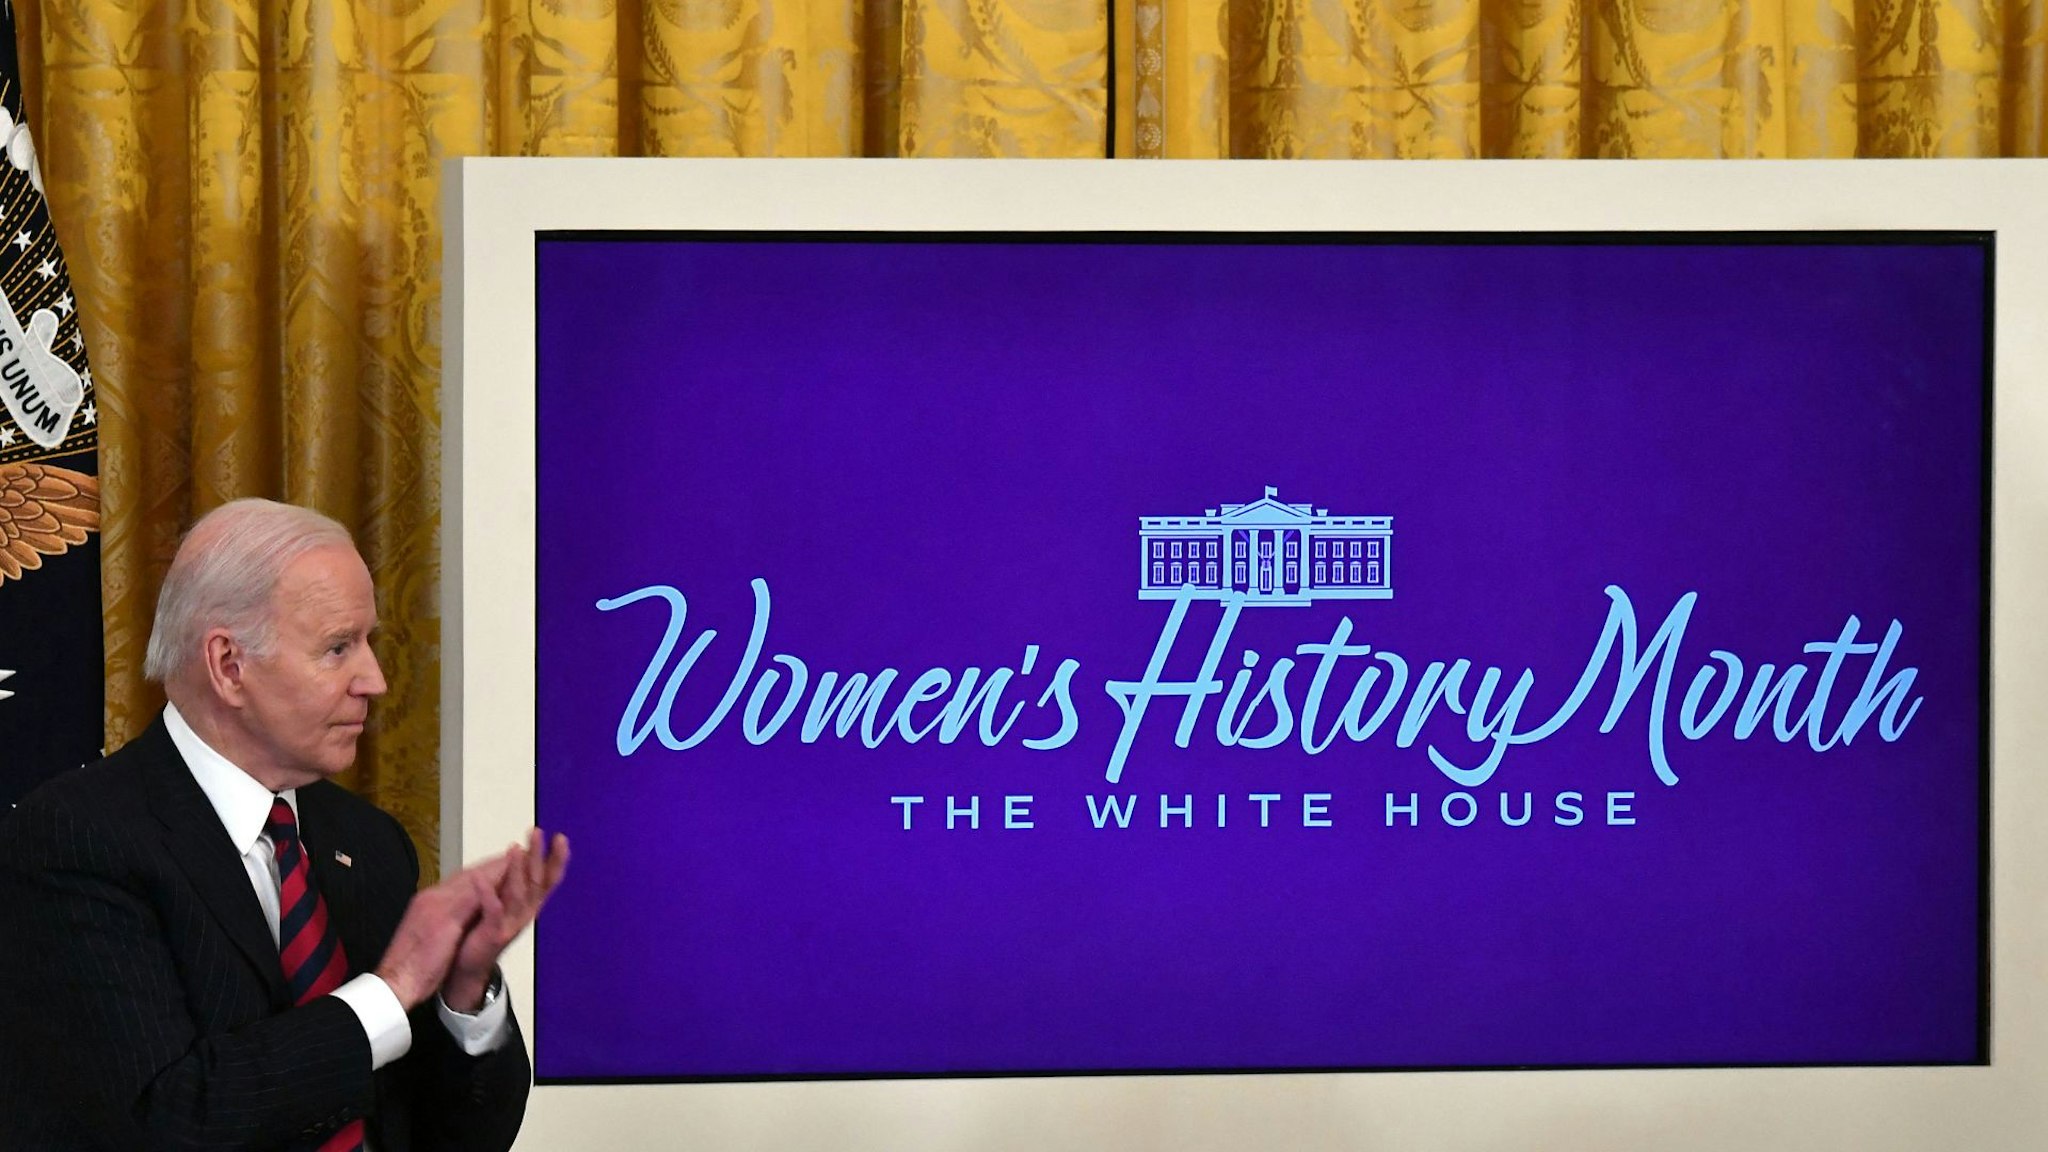 US President Joe Biden applauds as US First Lady Jill Biden (out of frame) speaks during the Equal Pay Day event to celebrate Womens History Month in the East Room of the White House in Washington, DC, March 15, 2022.